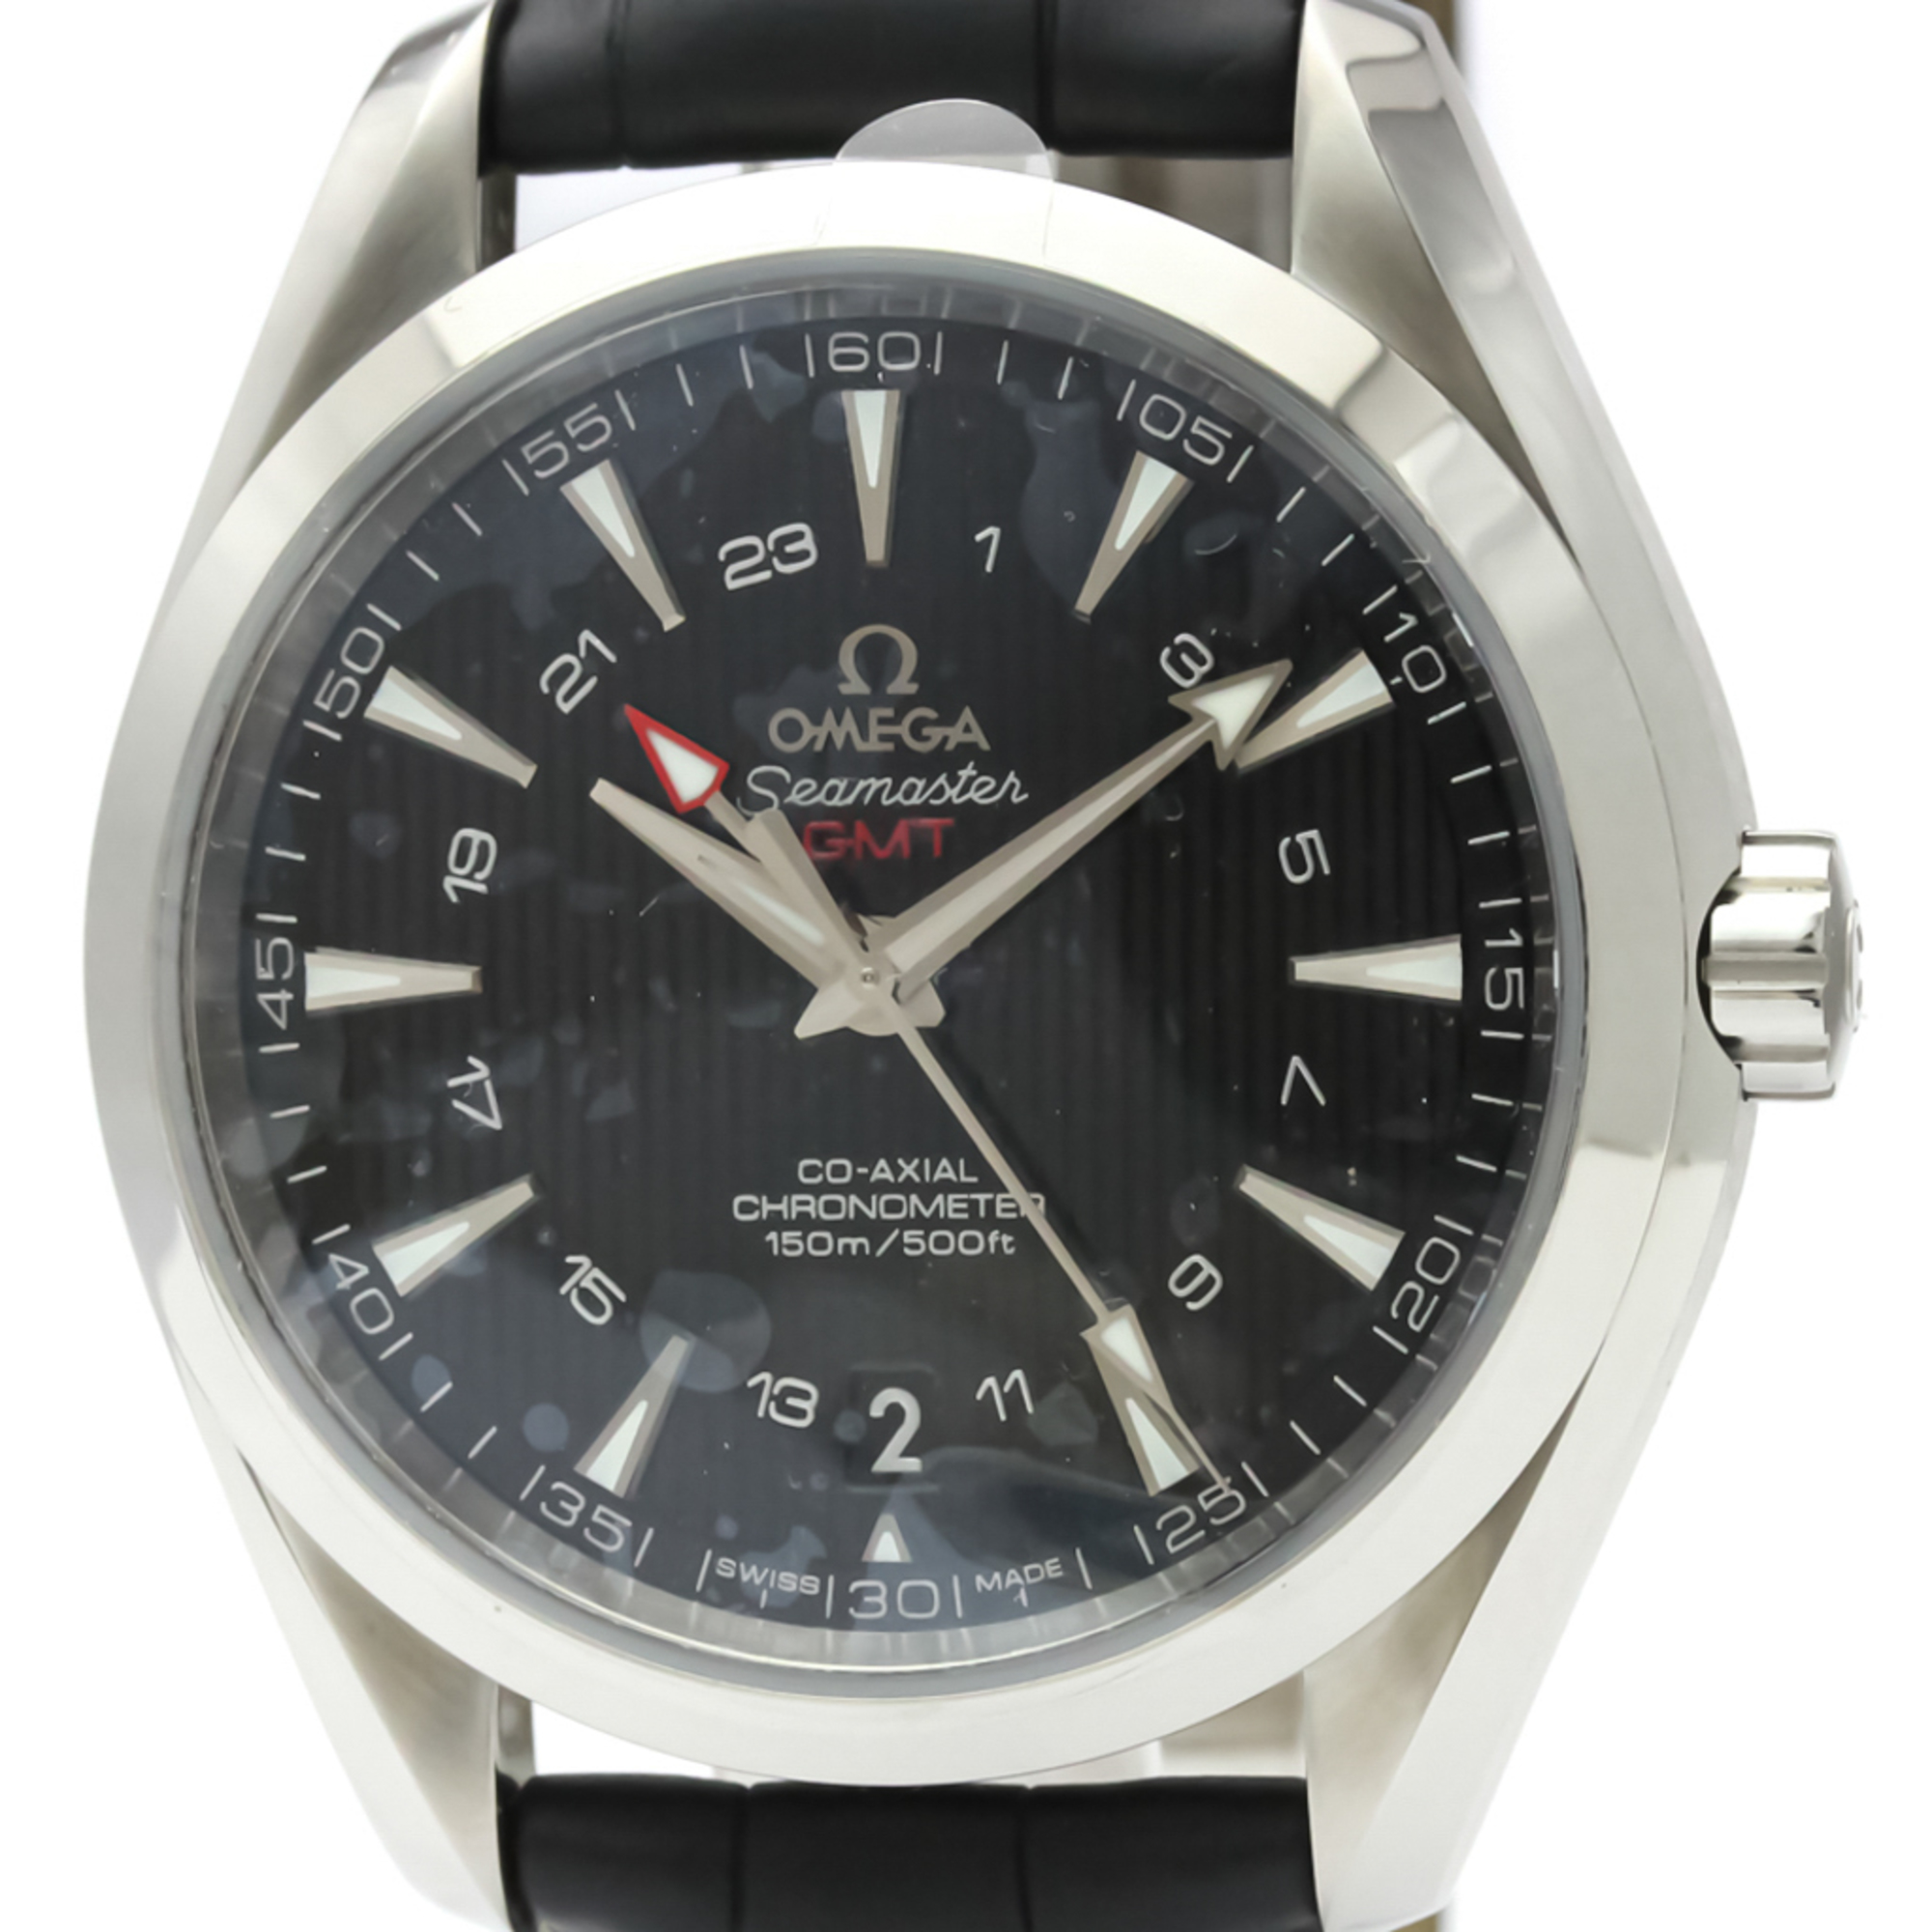 Omega Seamaster Automatic Stainless Steel Men's Sports Watch 231.13.43.22.01.001